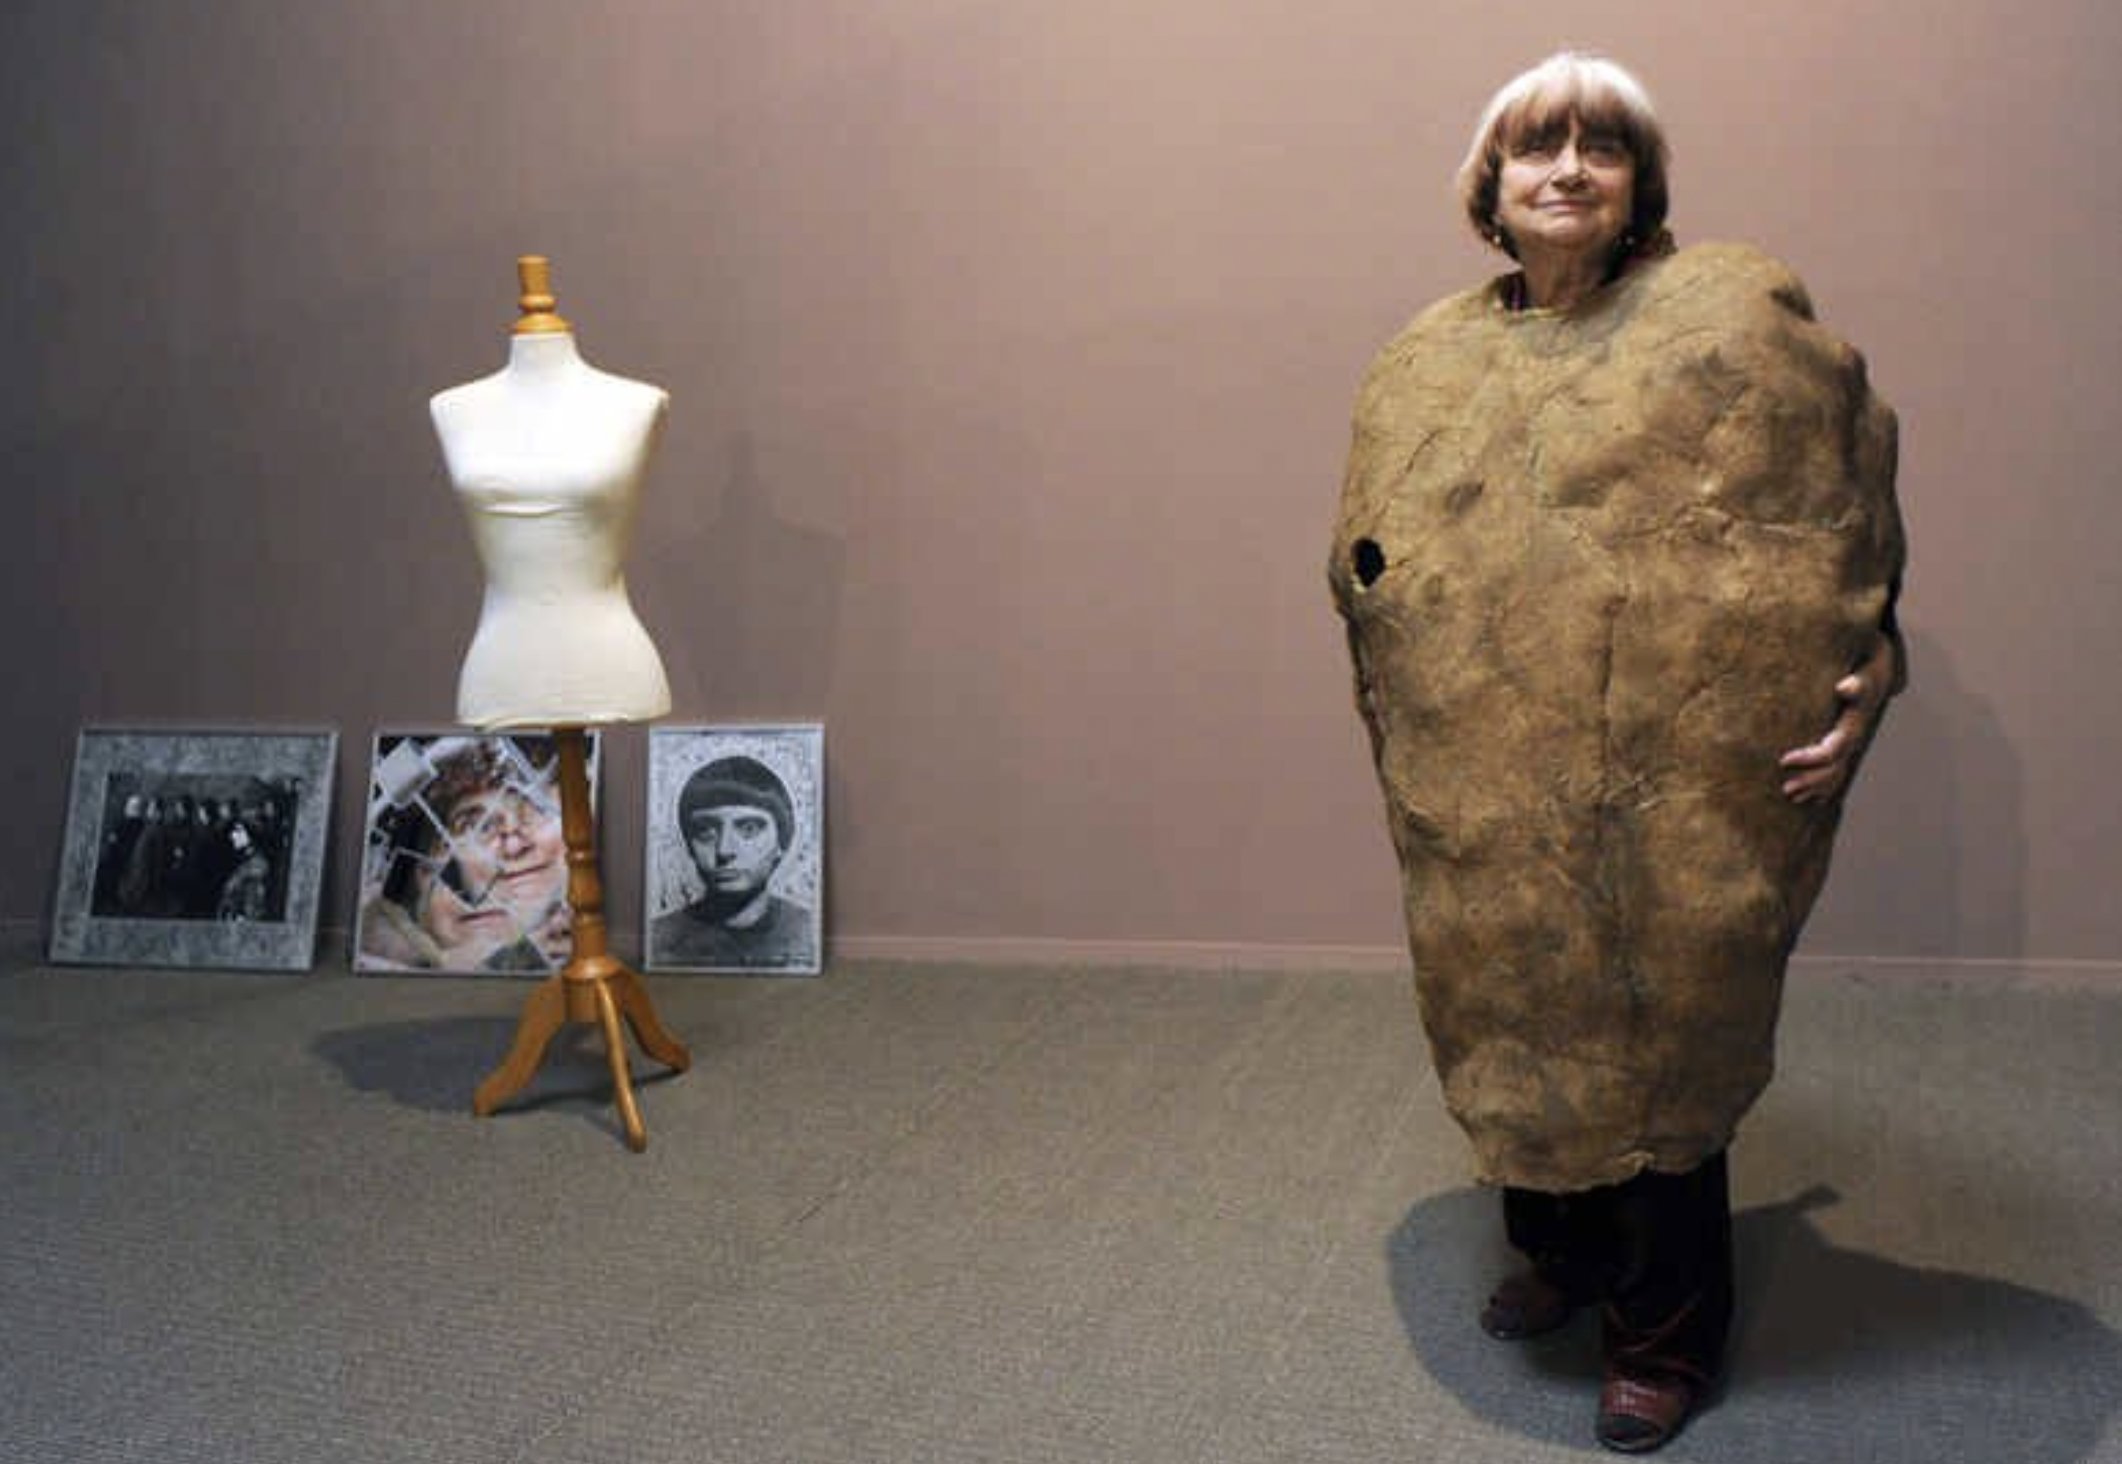 indeed, agnes varda is dressed as a potato and smiling